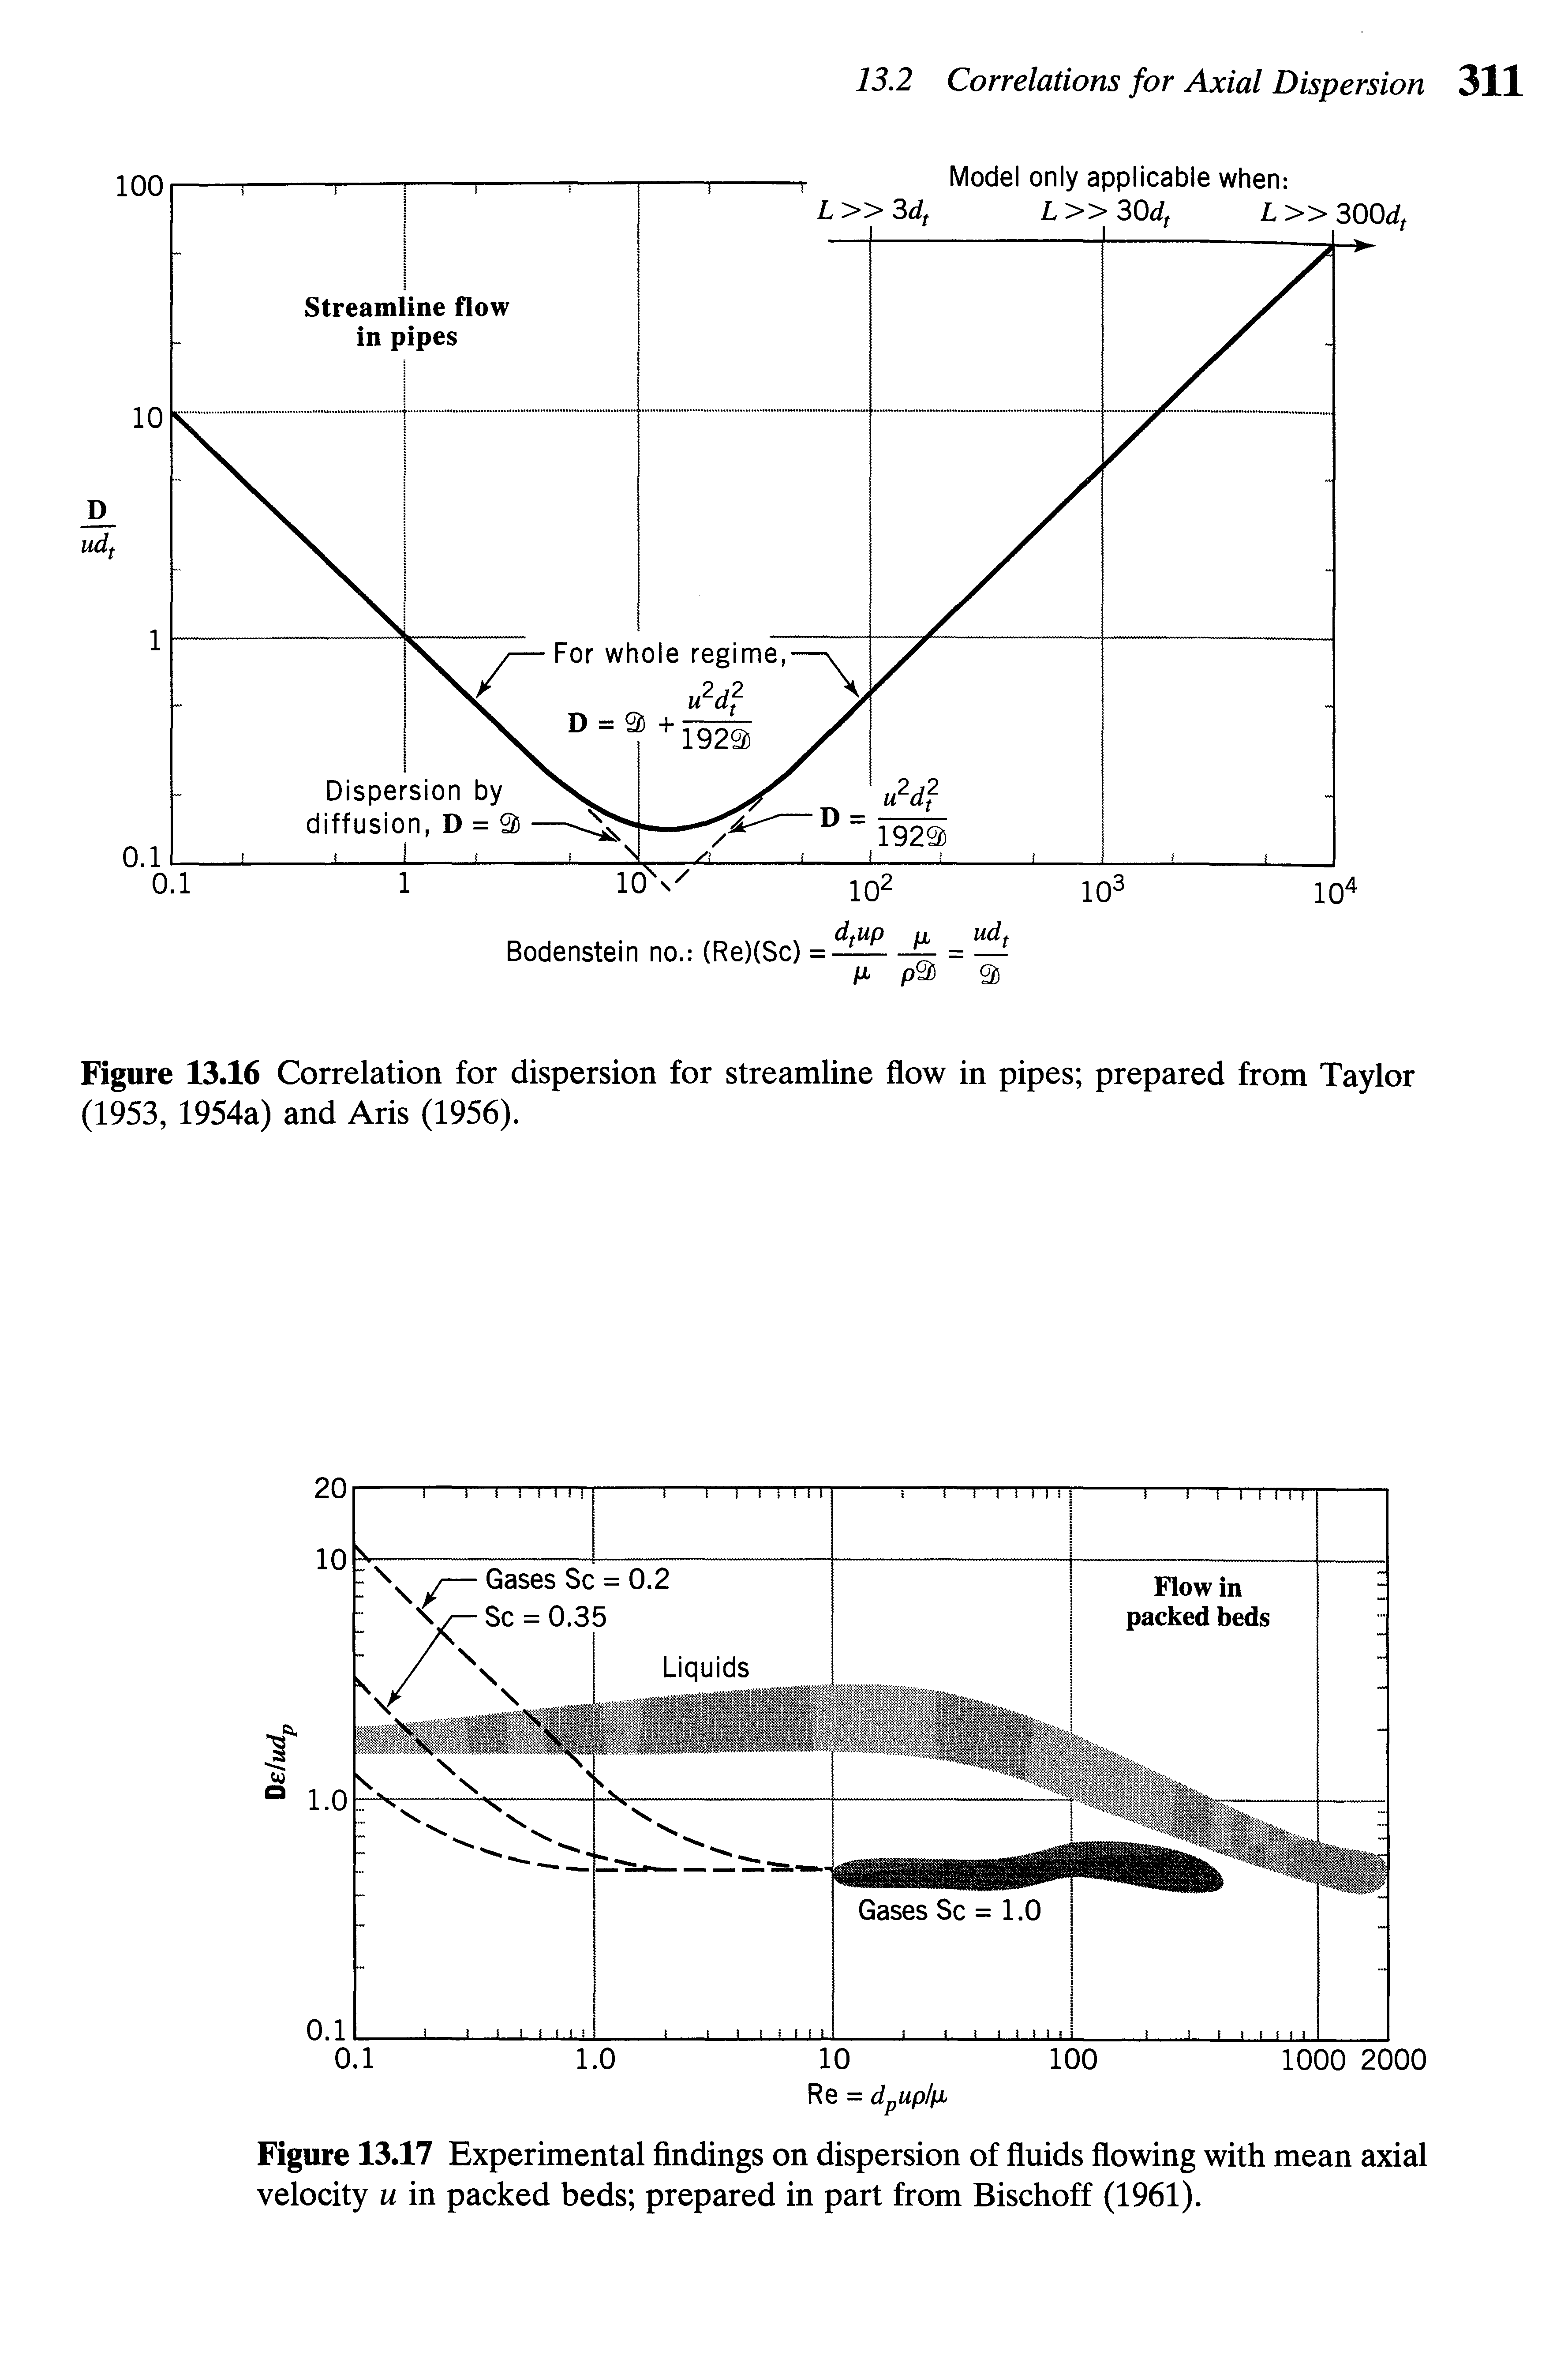 Figure 13.17 Experimental findings on dispersion of fluids flowing with mean axial velocity u in packed beds prepared in part from Bischoff (1961).